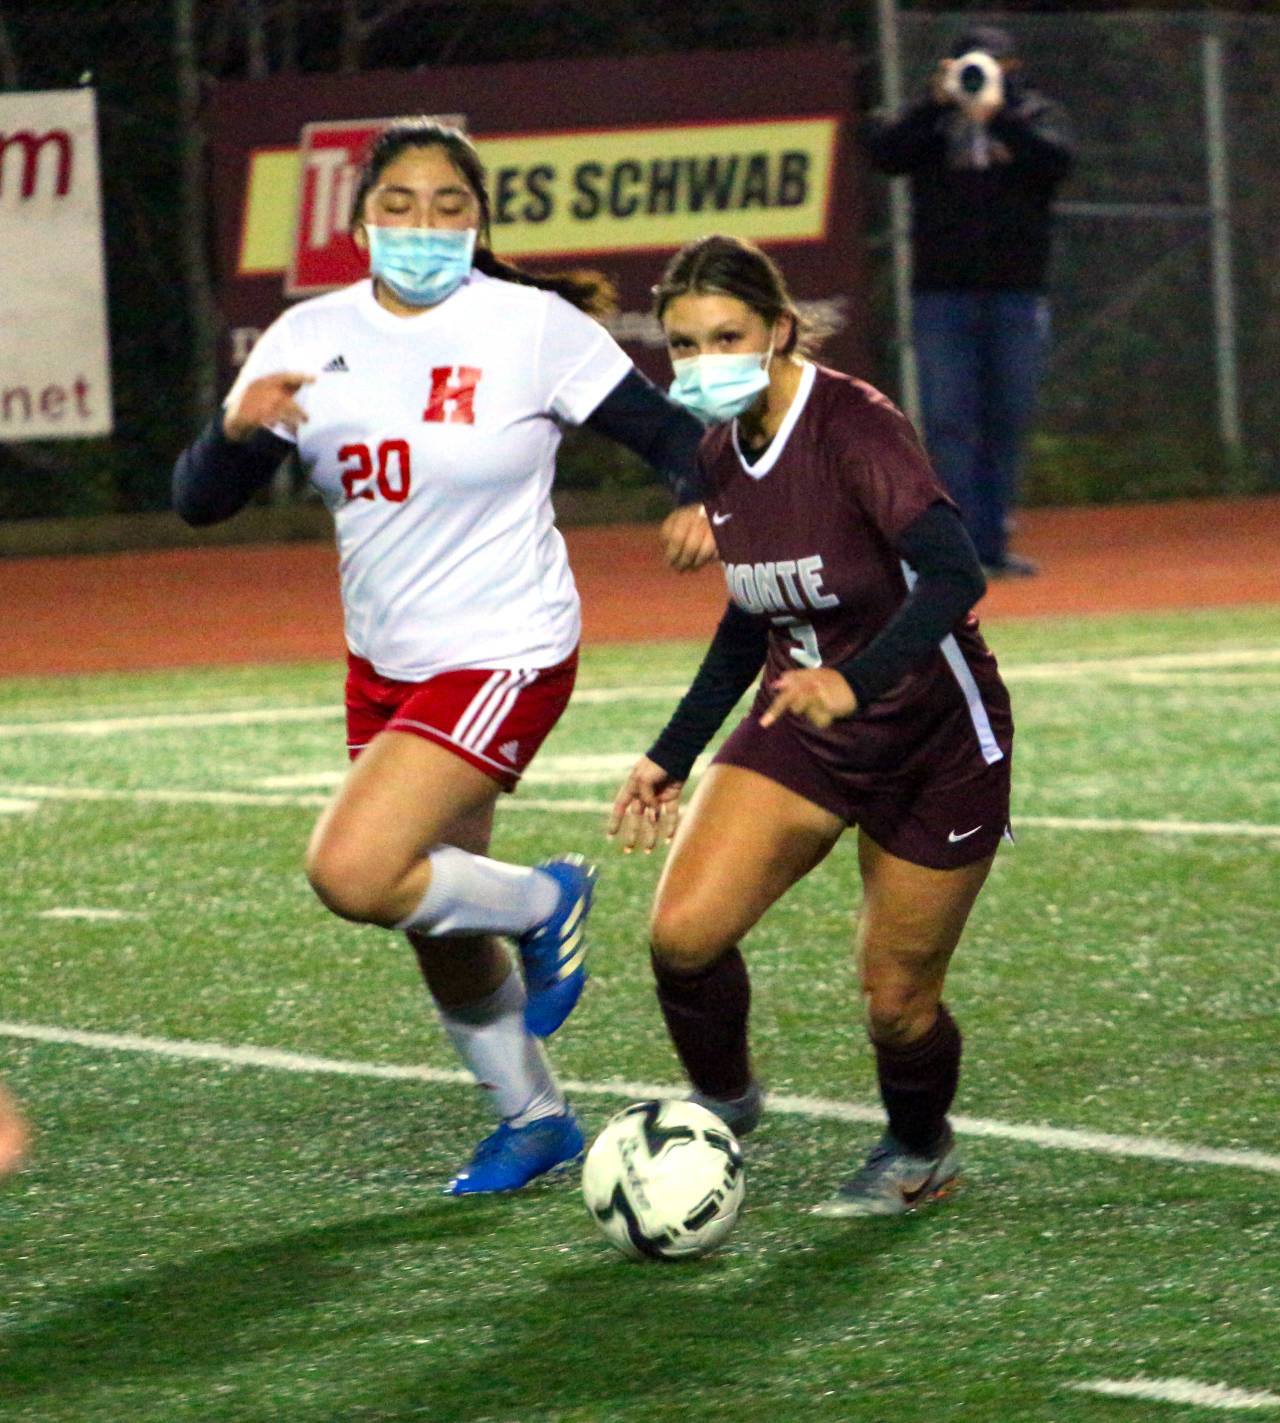 Montesano's Sierra Birdsall, right, dribbles against Hoquiam's Viridiana Cordova-Aguirre during the Bulldogs' 10-0 win on Tuesday in Montesano. Birdsall had a goal and two assists in the game. (Ryan Sparks | The Daily World)